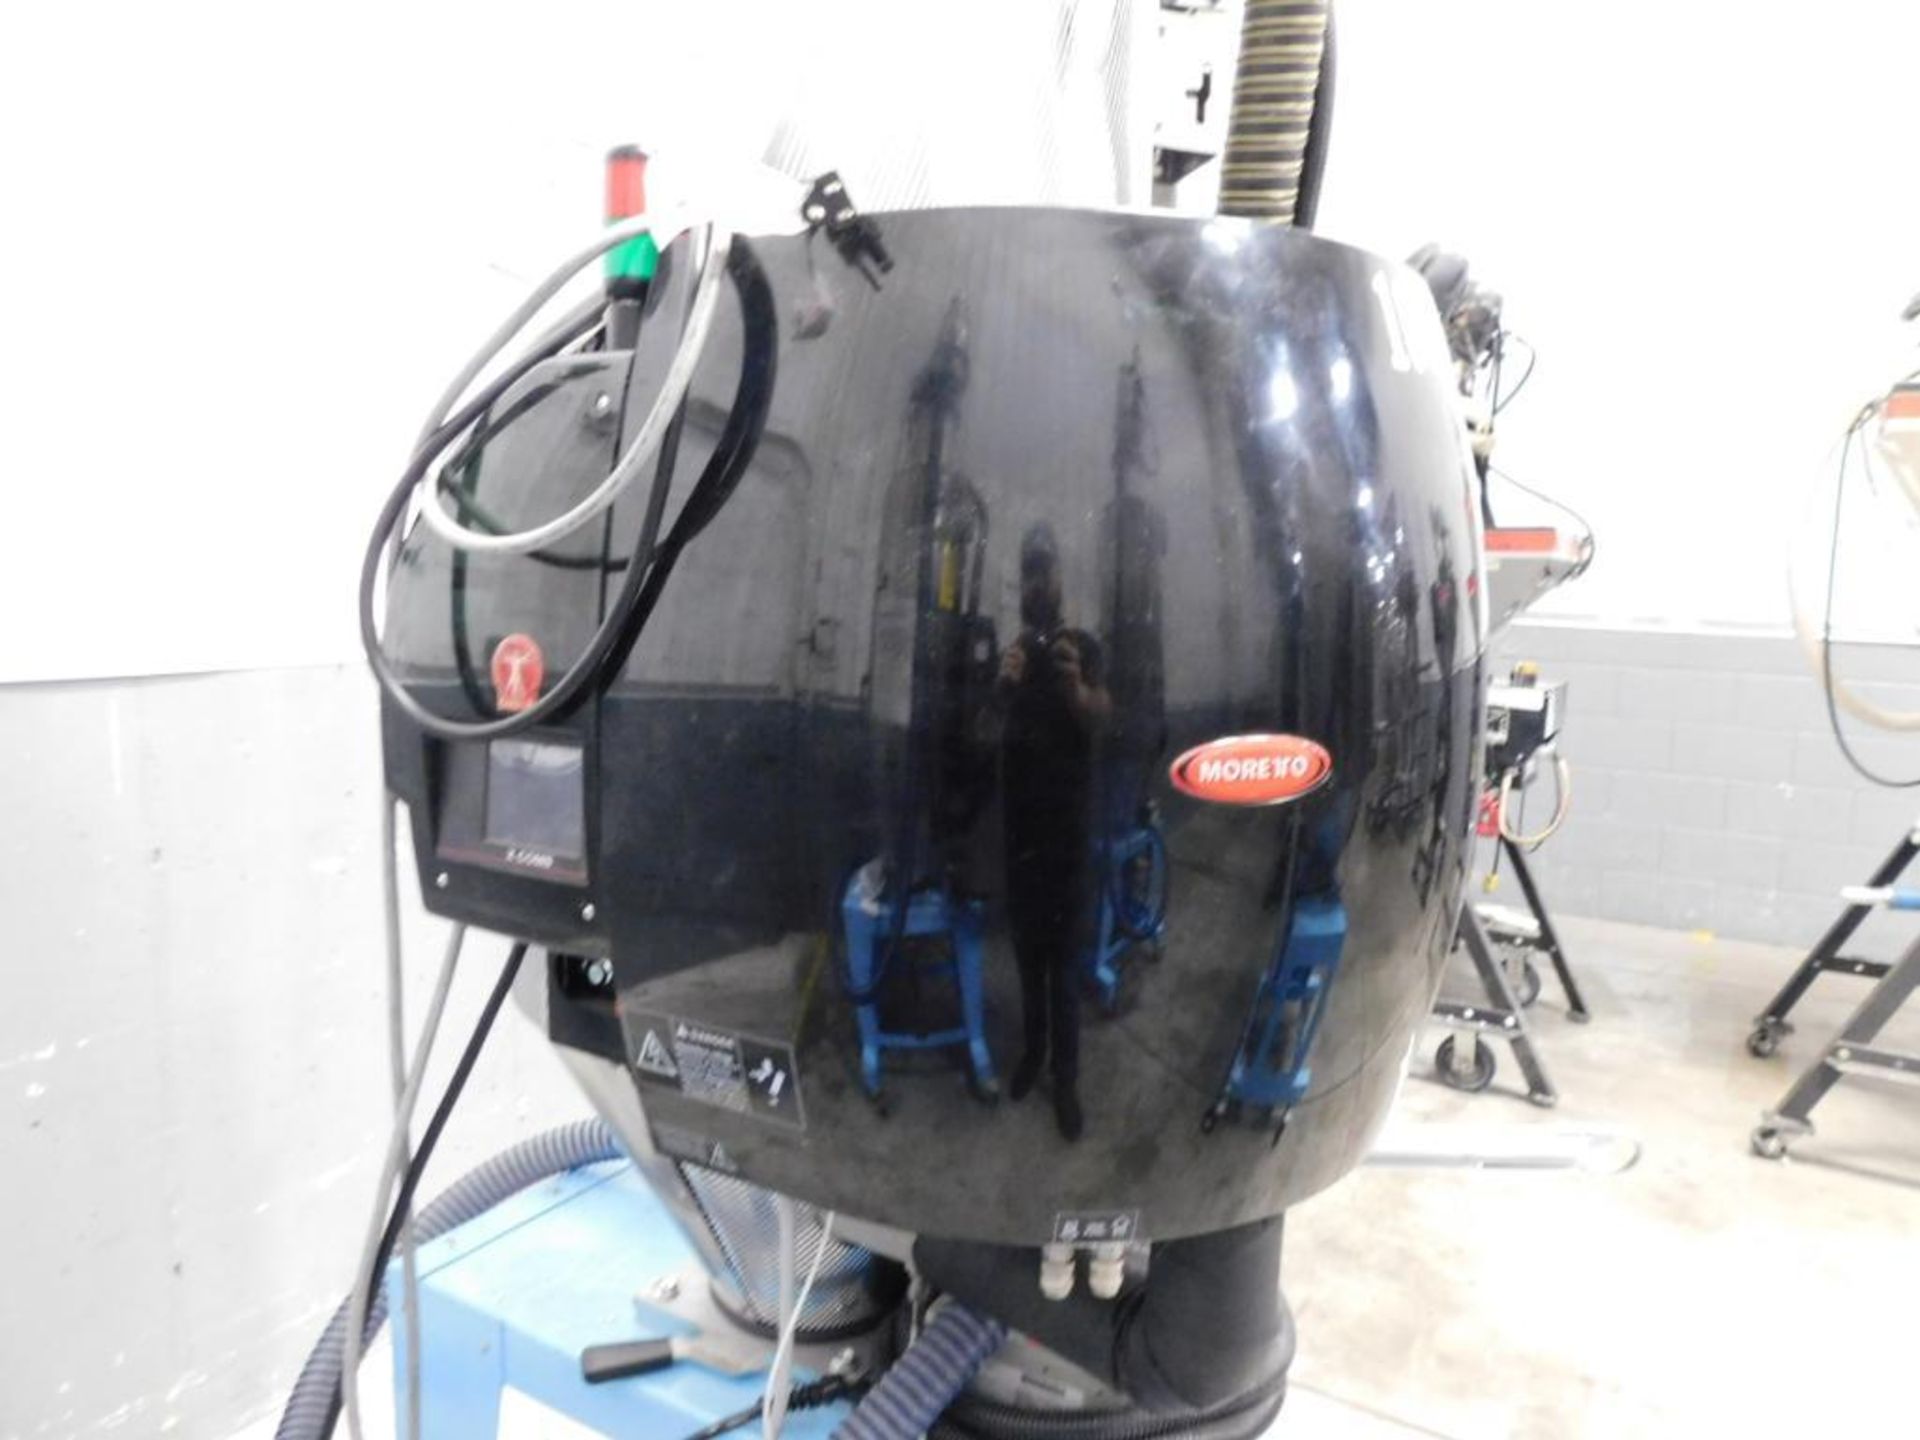 Moretto OTX80 Portable Material Dryer 100 Lb. Capacity Top Loaded Insulated Hopper, AEC Vacuum Loade - Image 4 of 10